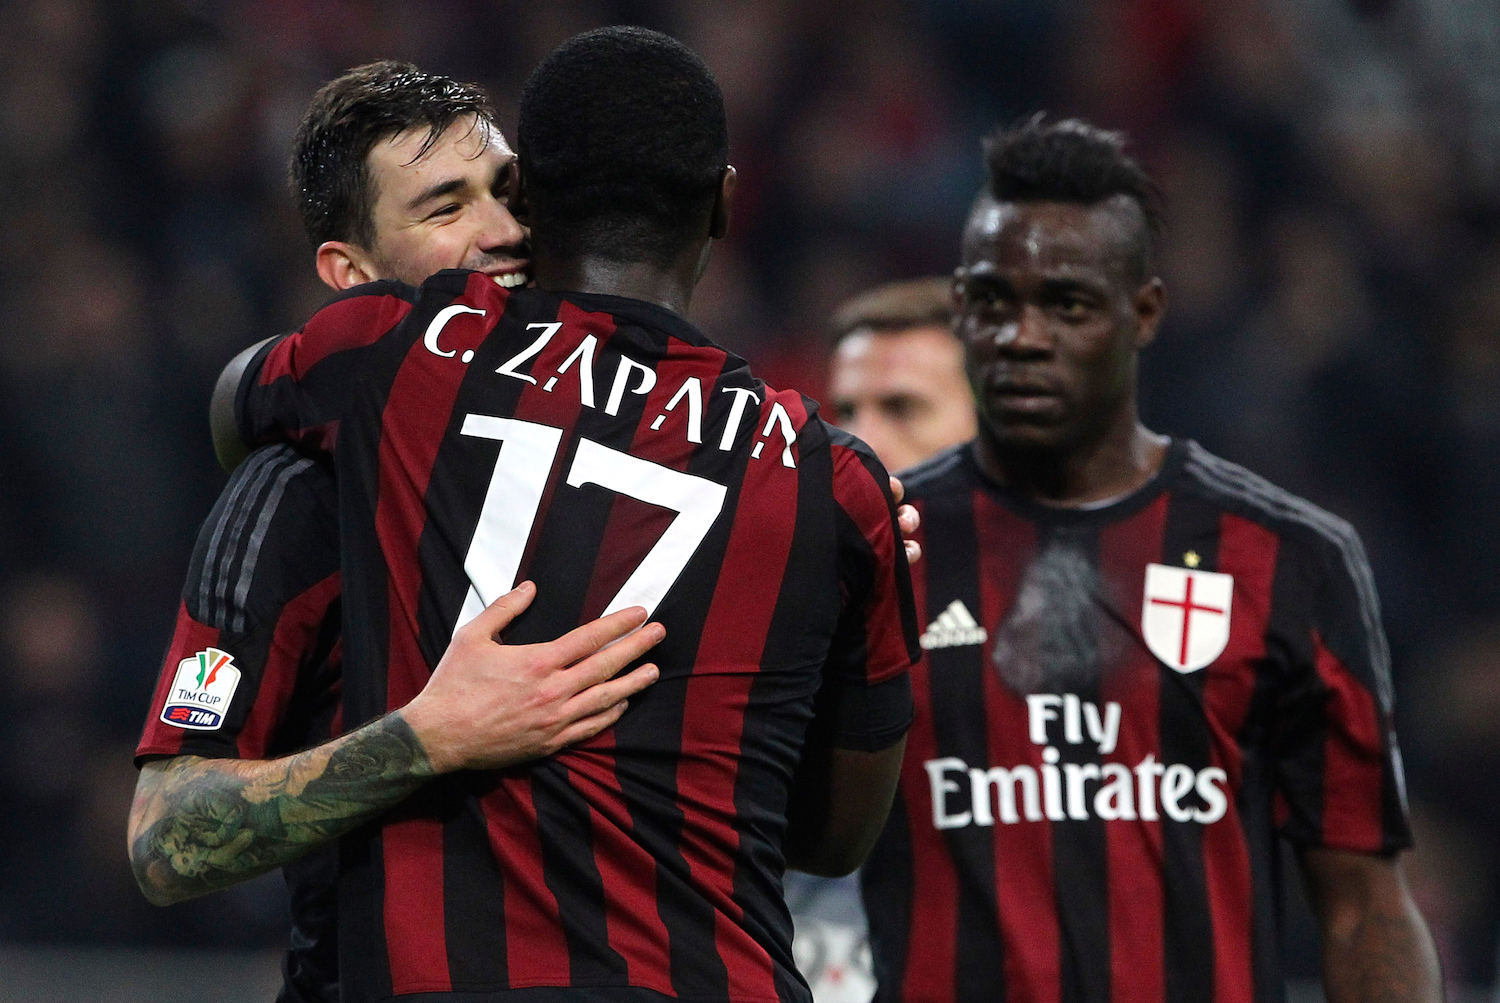 Zapata and Romagnoli embrace after a goal. | Marco Luzzani/Getty Images